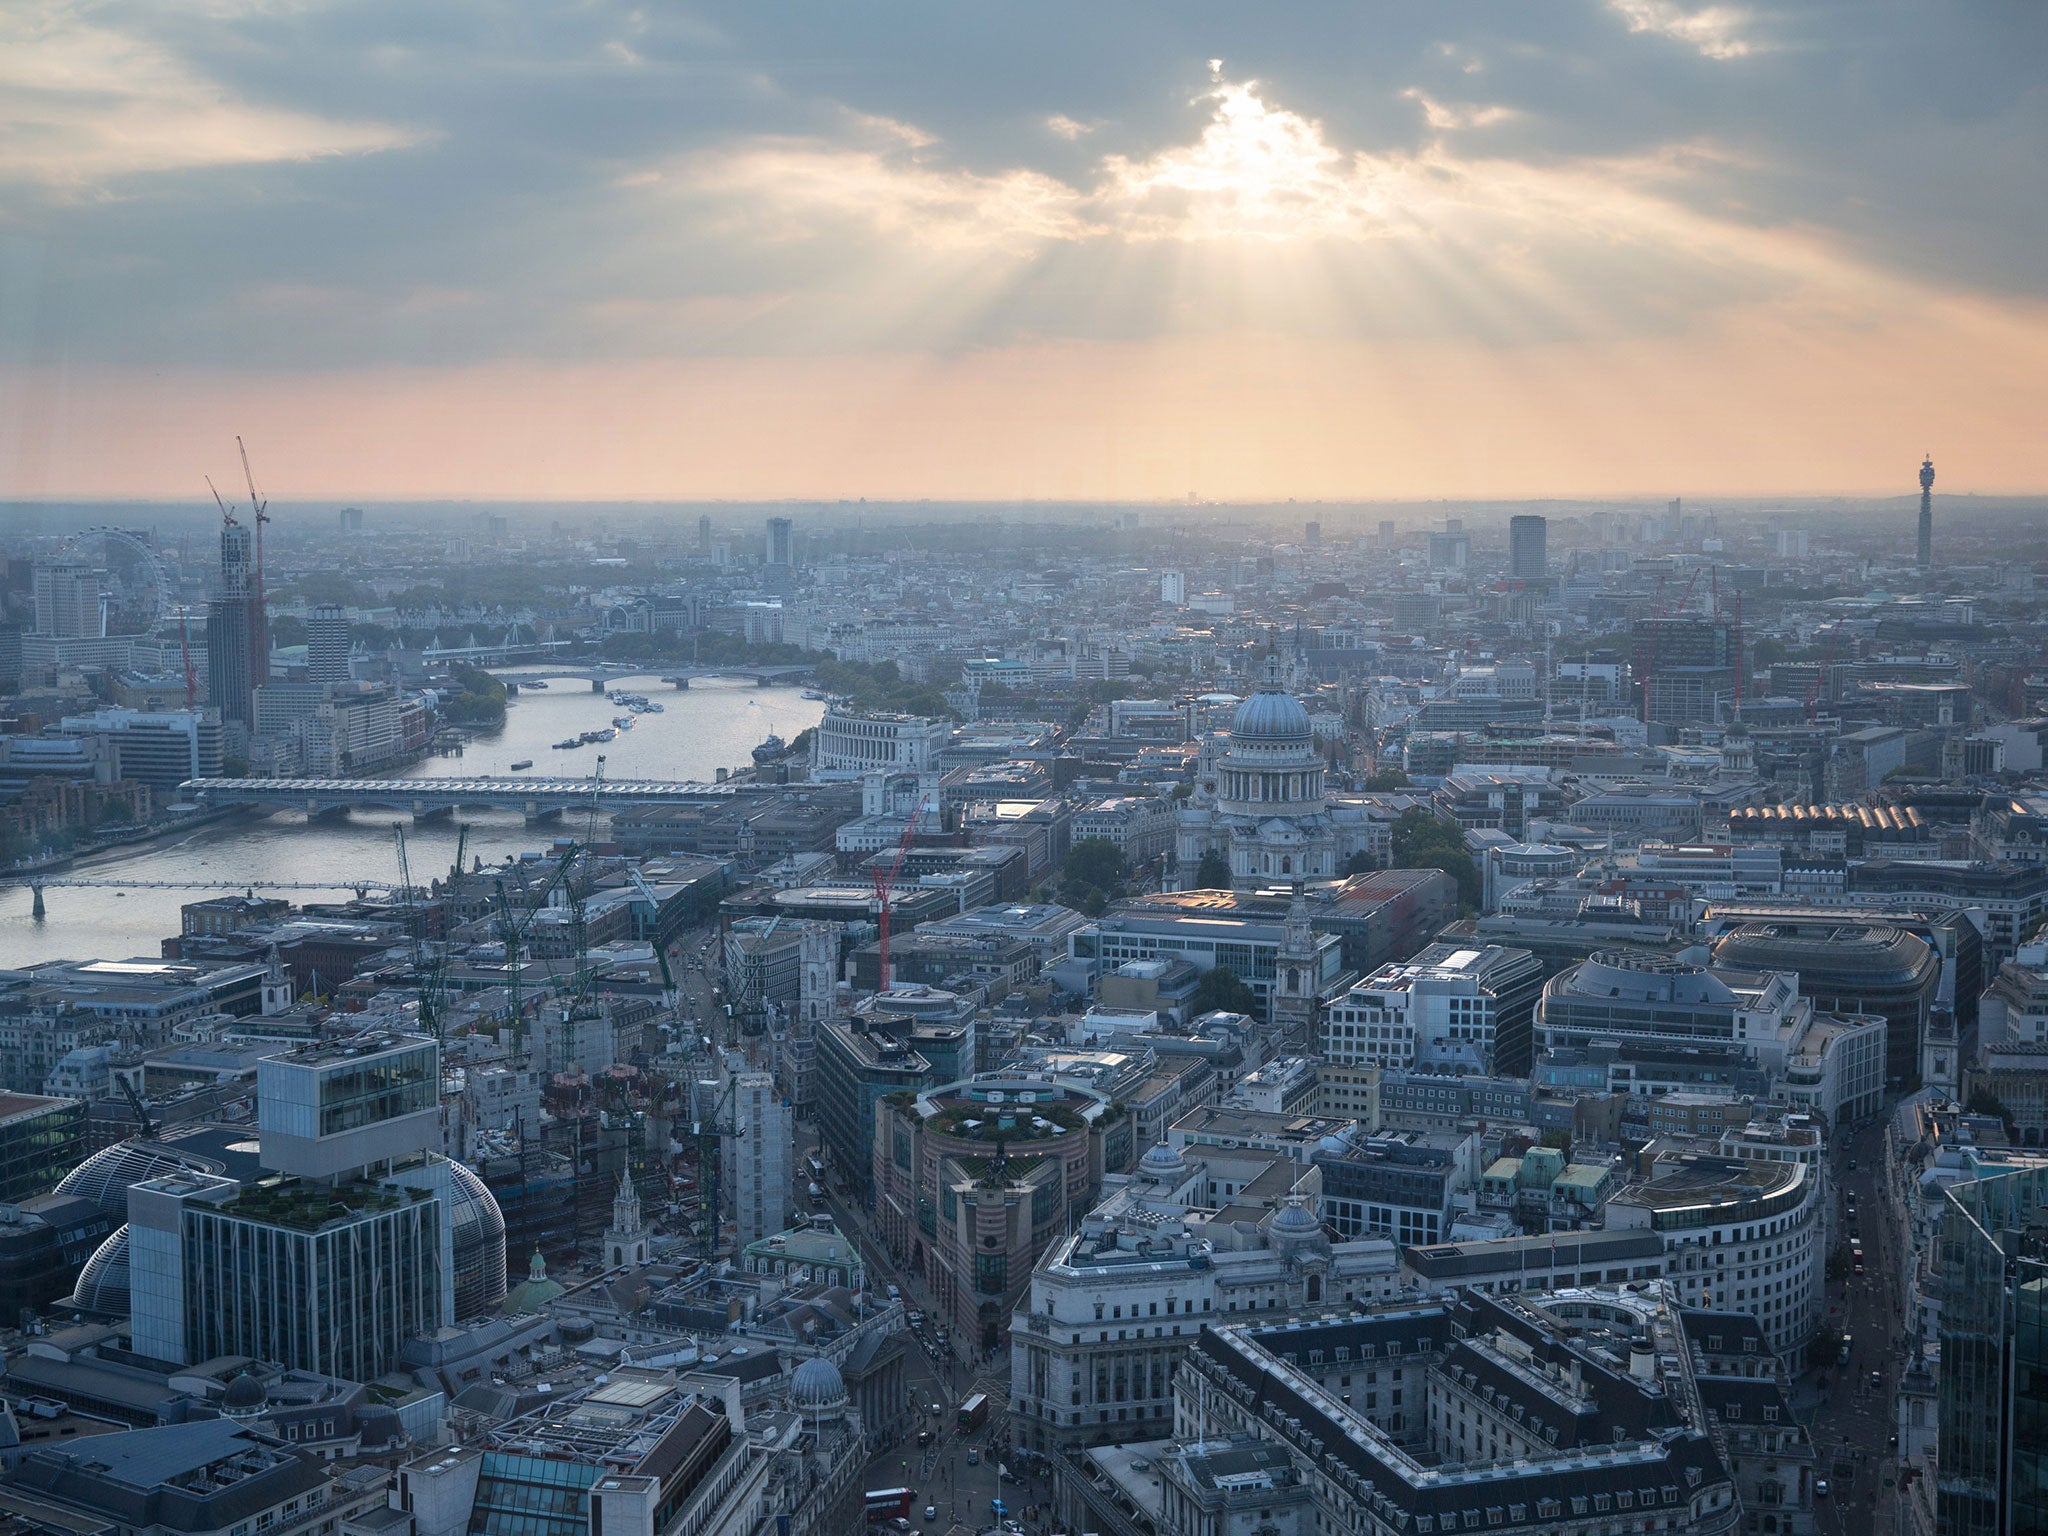 Much of the most expensive London property is held by overseas investors